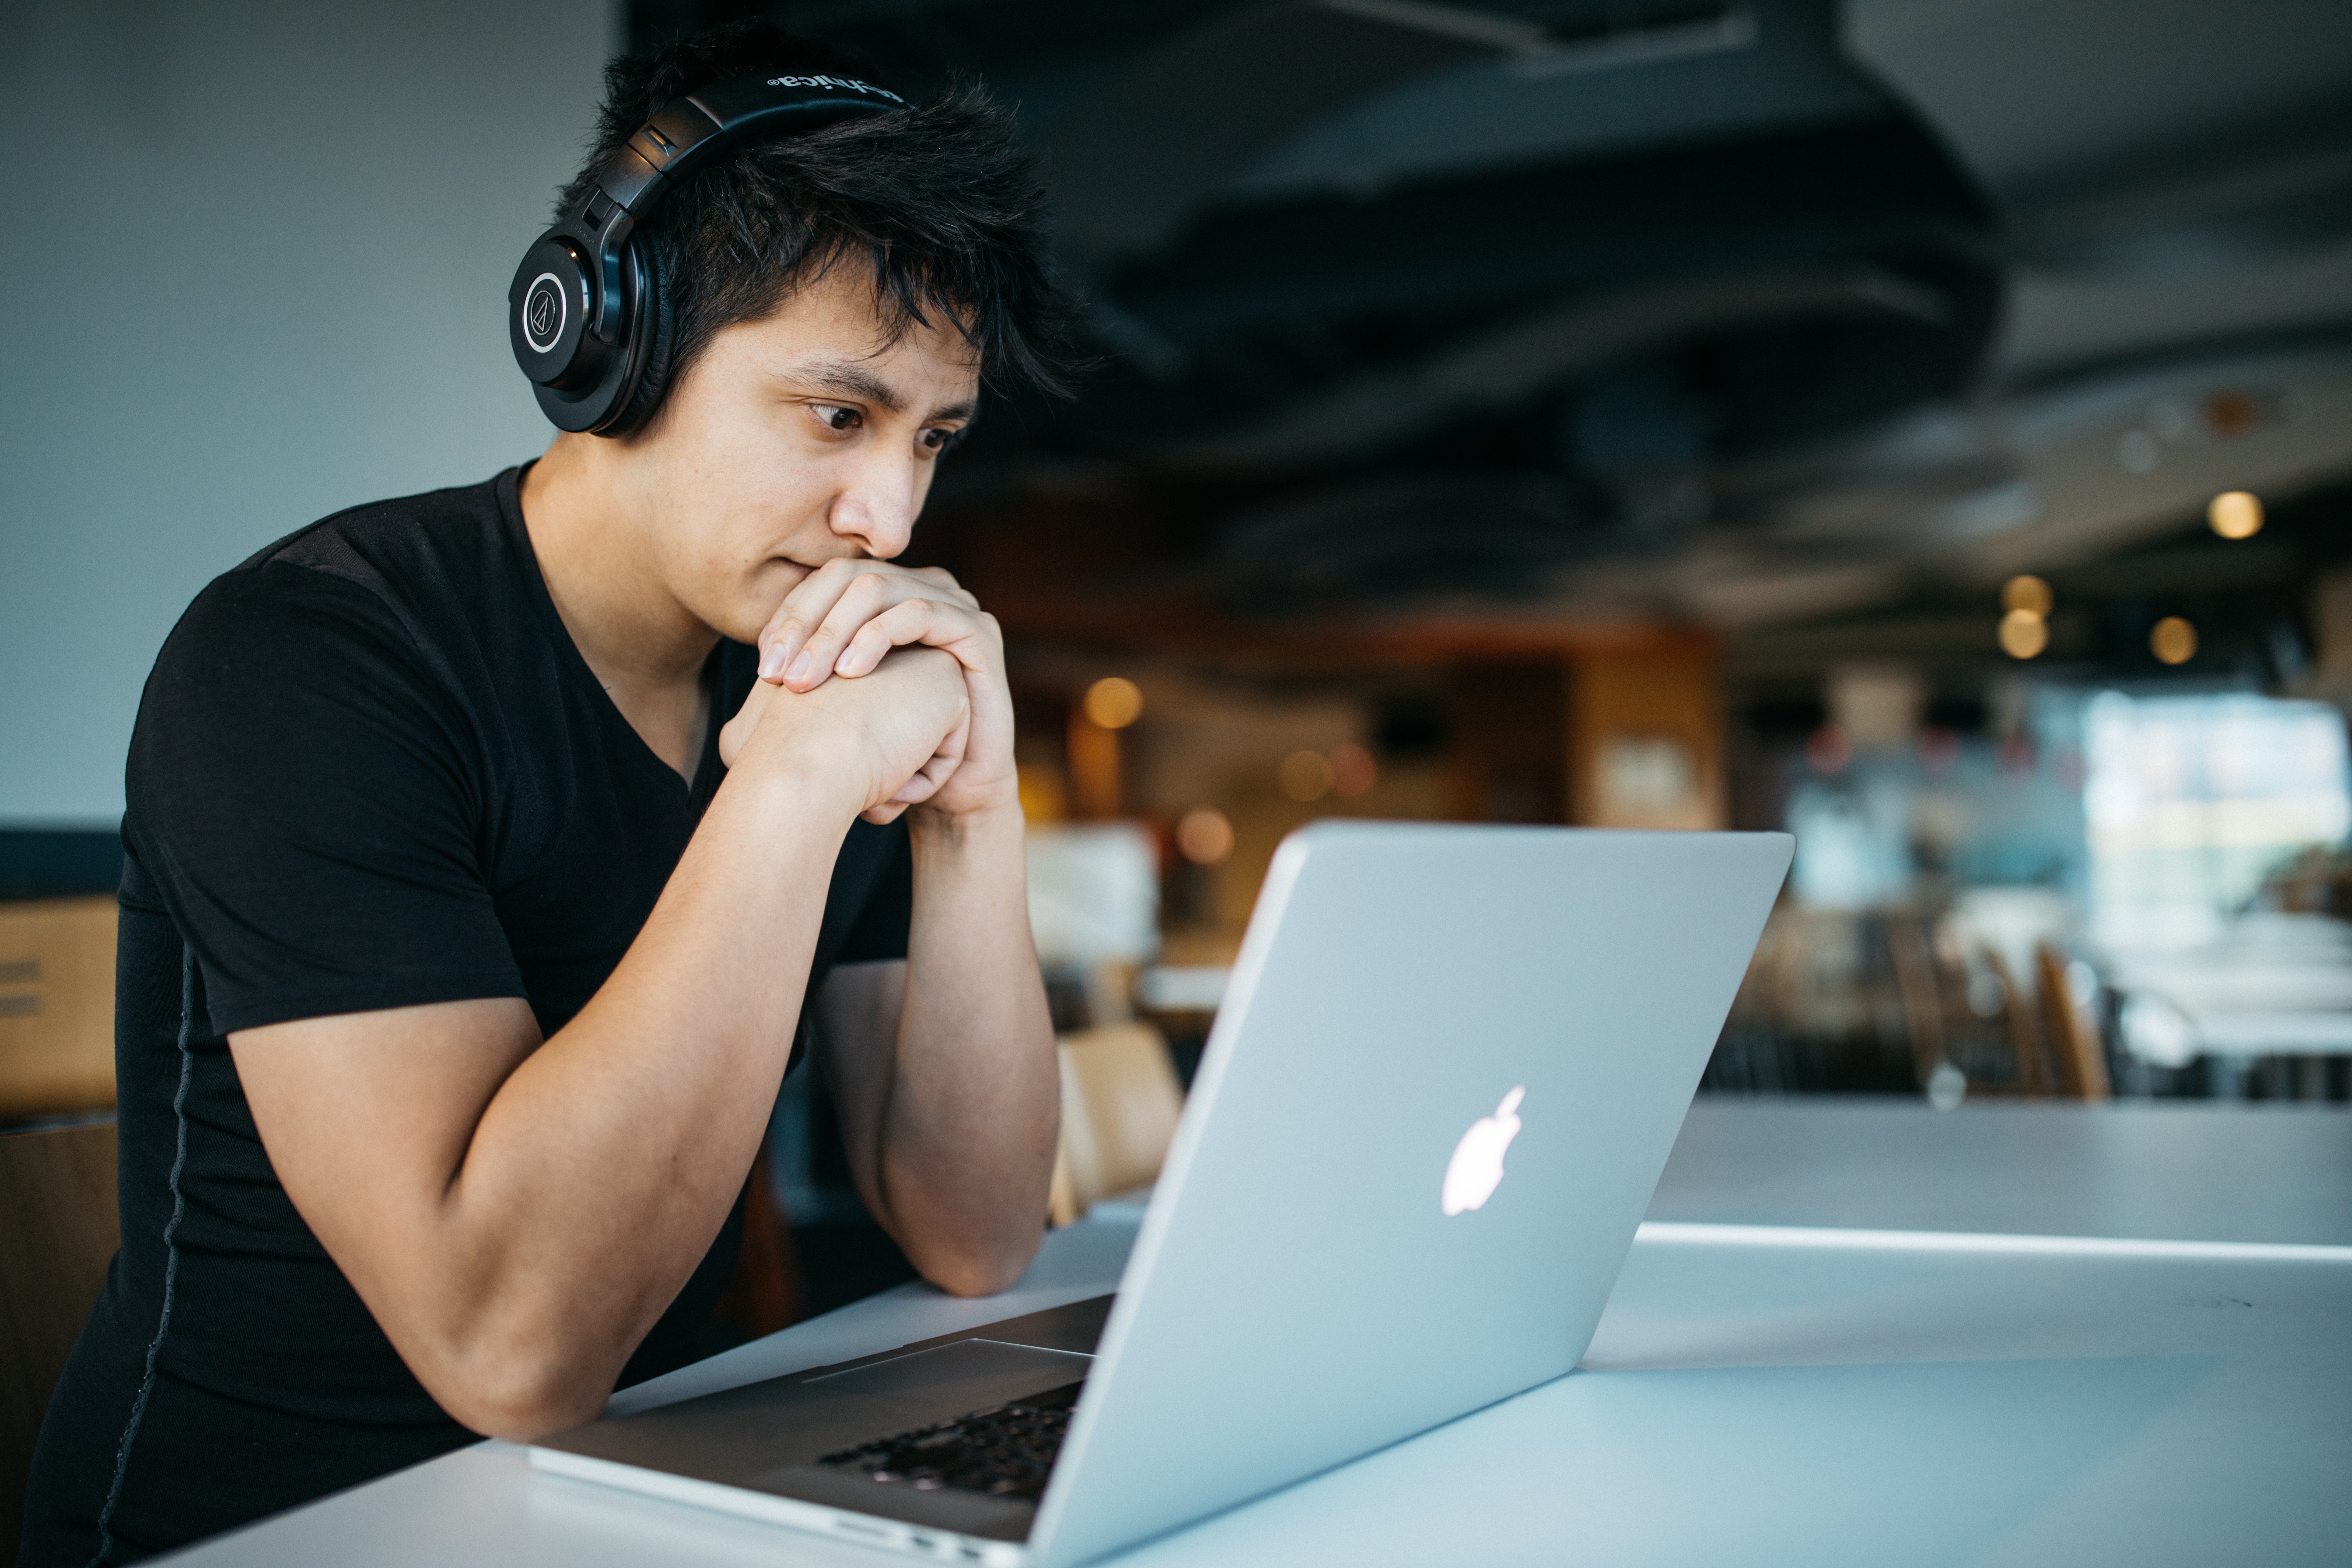 Man with headphones looking at a laptop